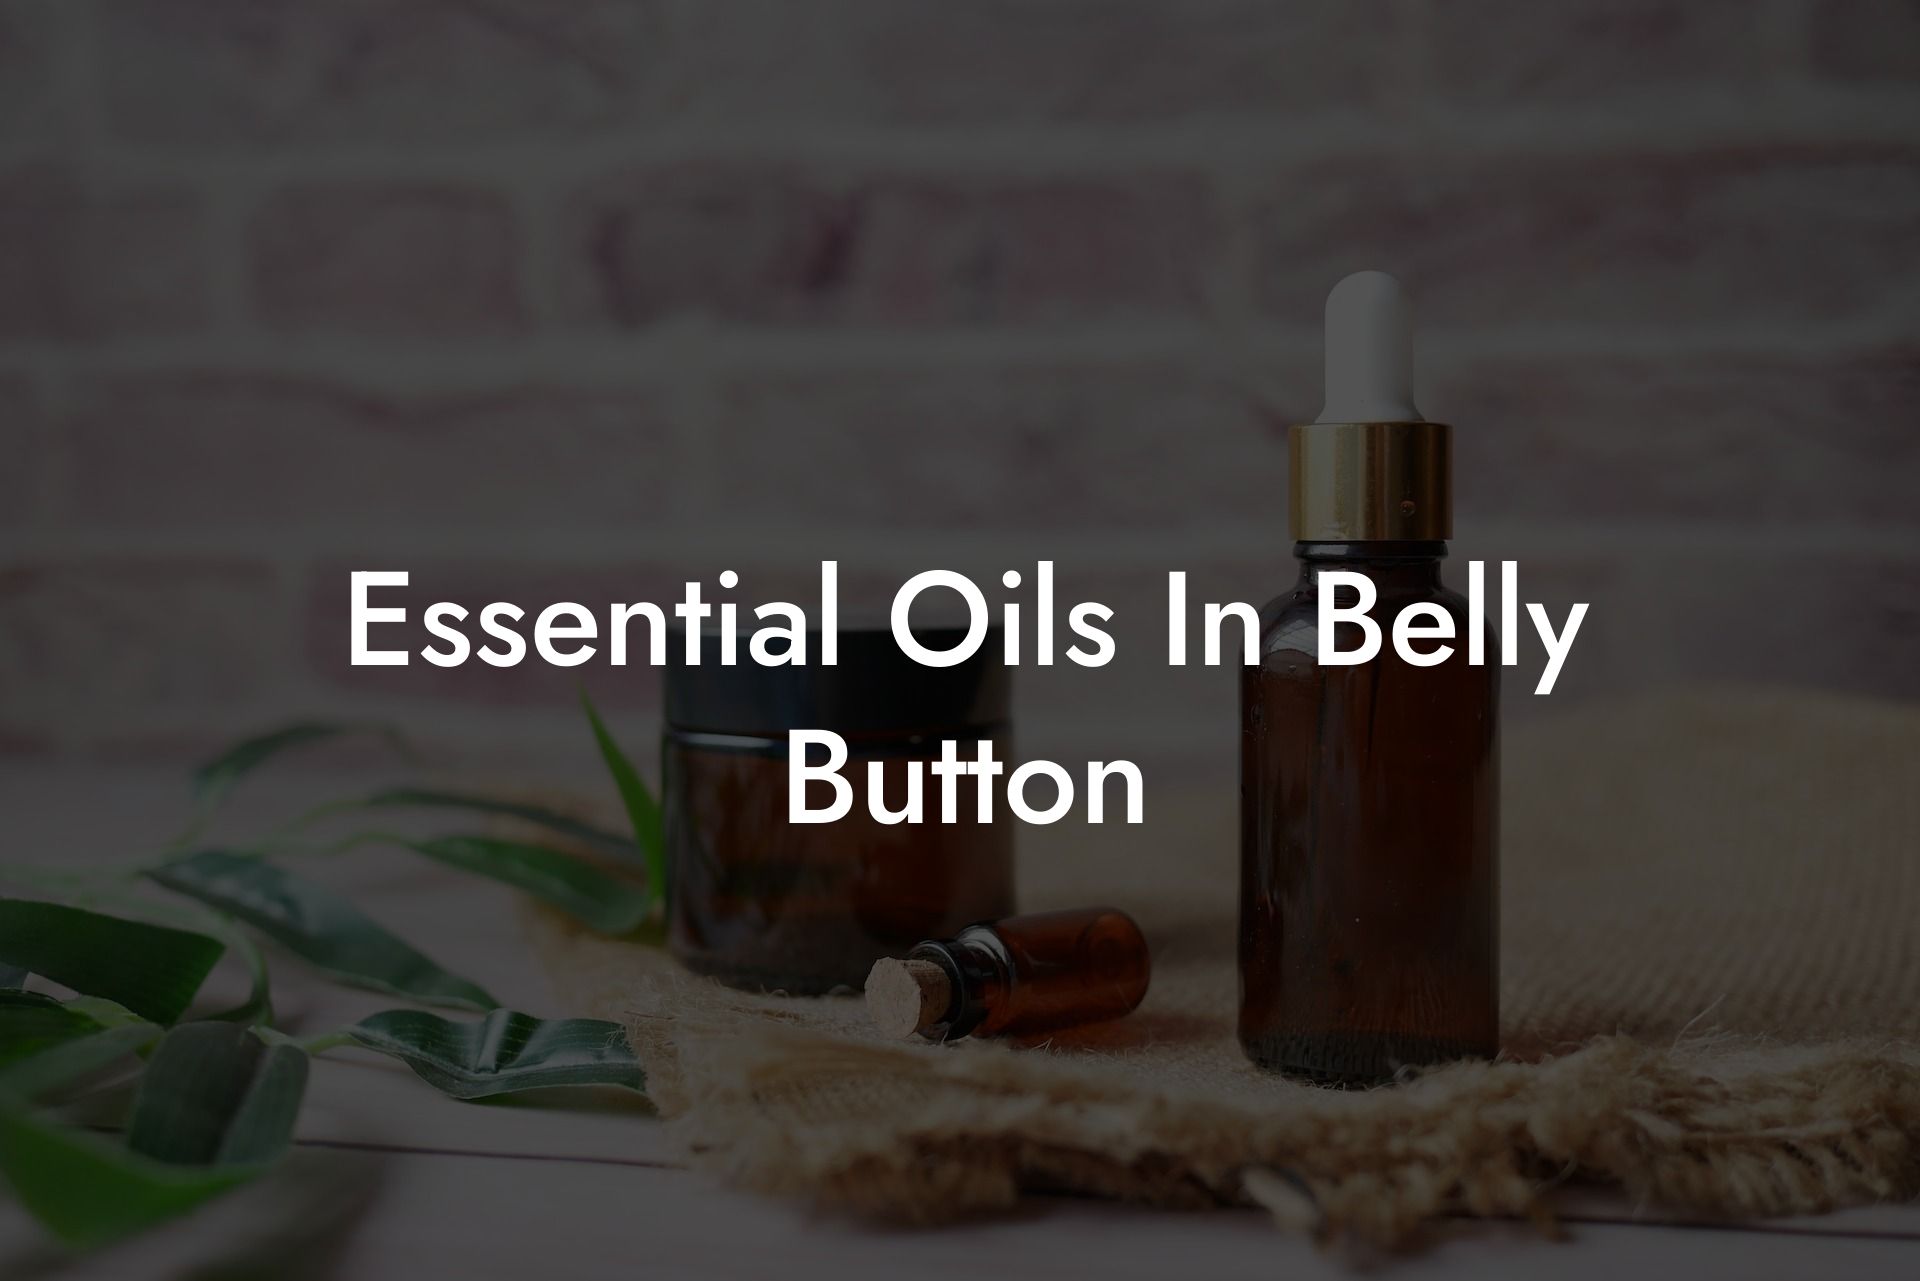 Essential Oils In Belly Button